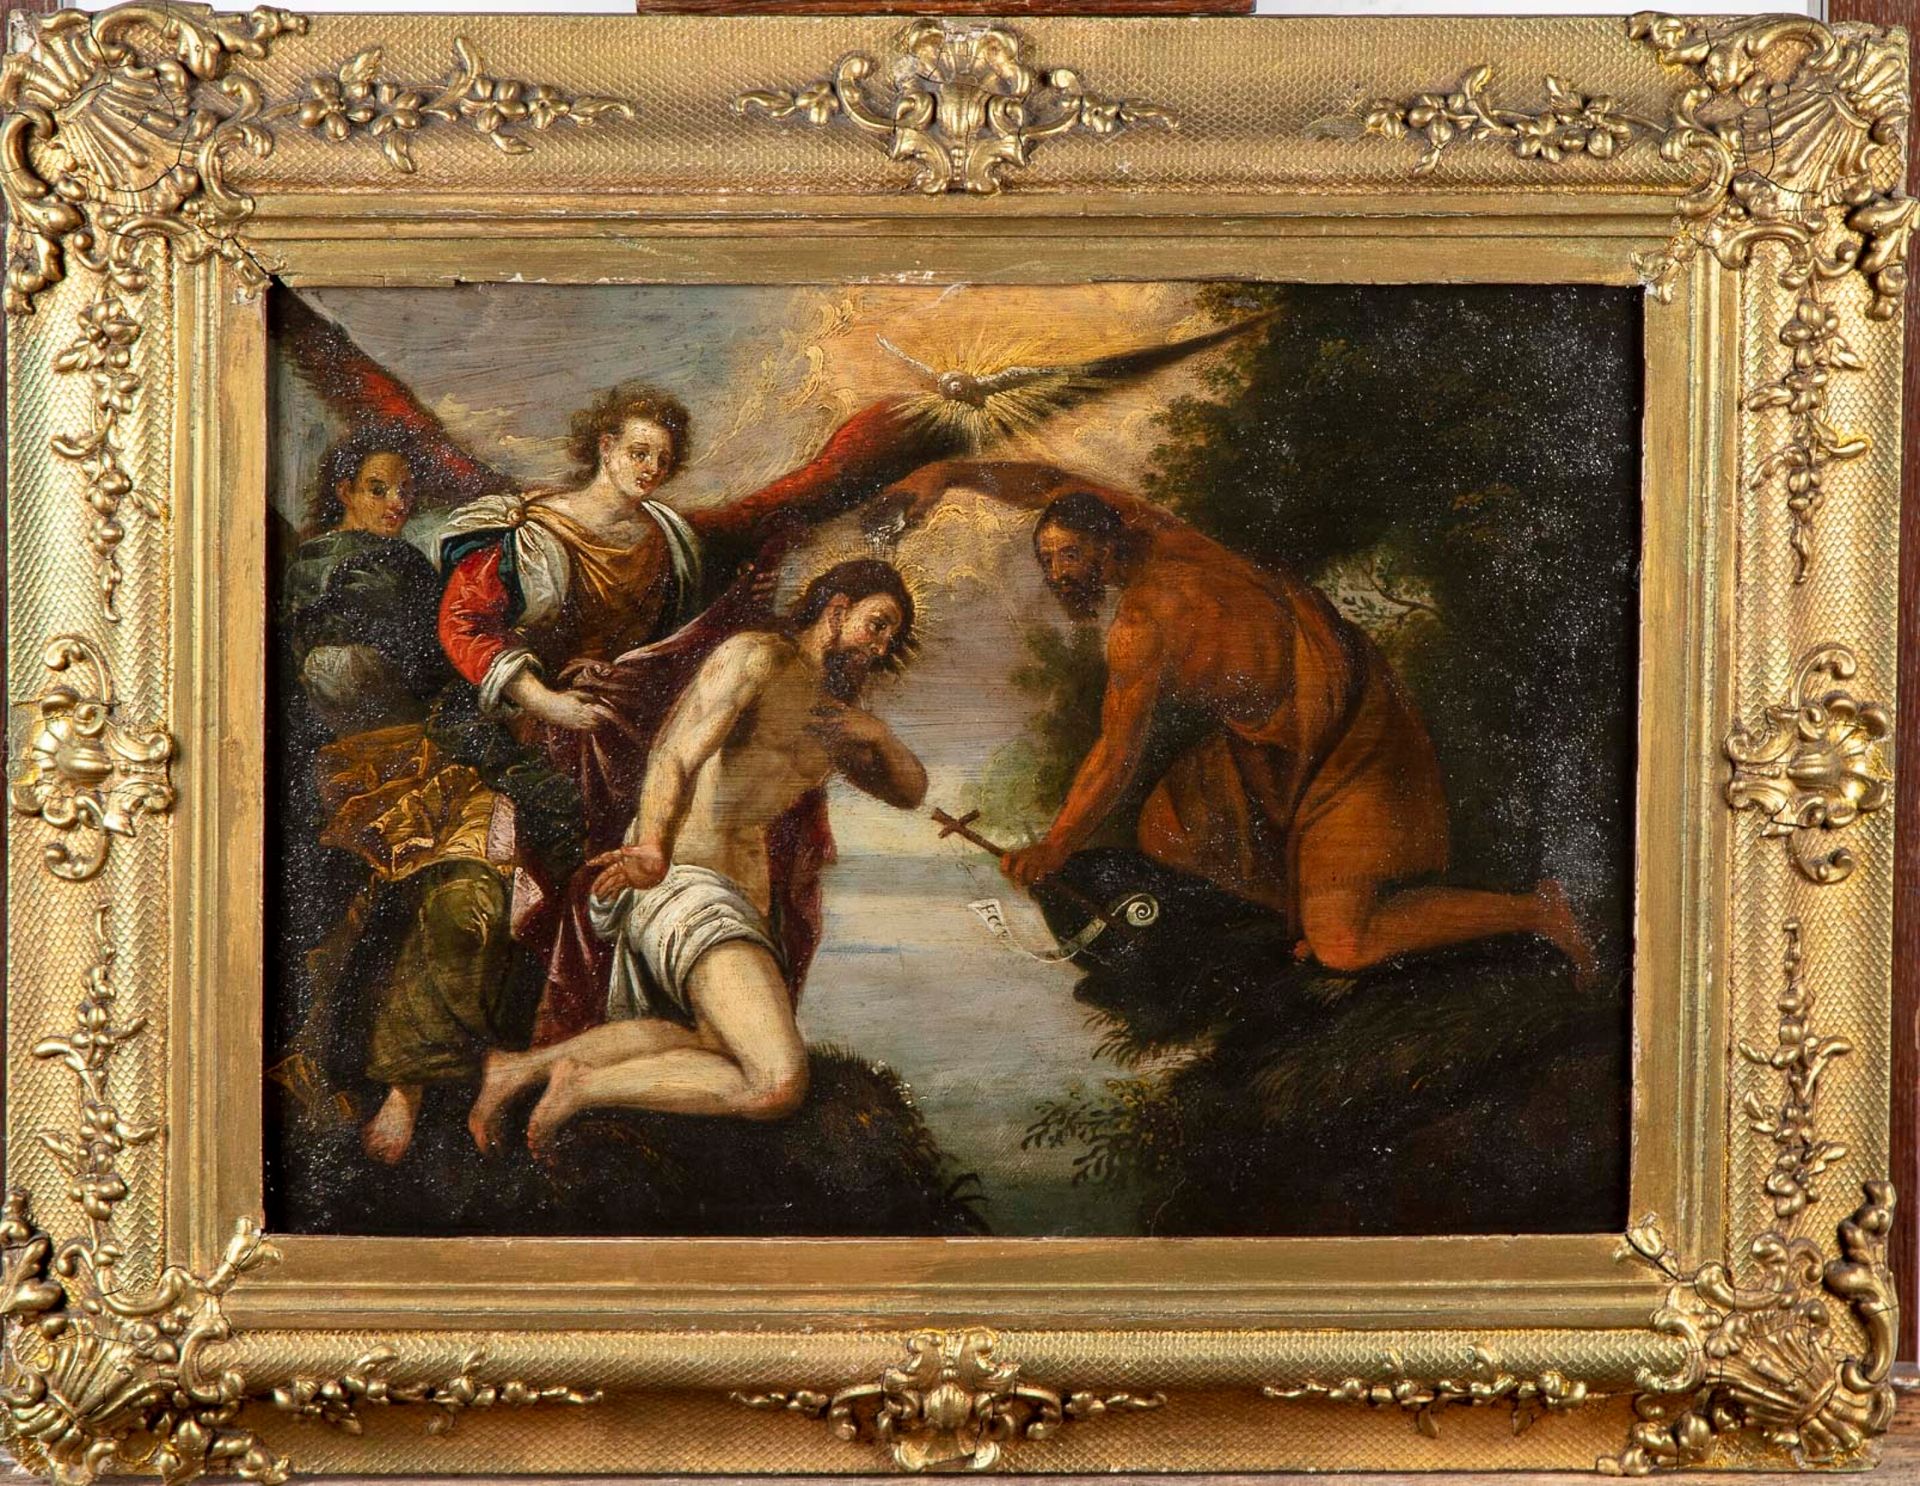 Null 17th and 18th century ITALIAN SCHOOL

The Baptism of Christ

Oil on metal

&hellip;